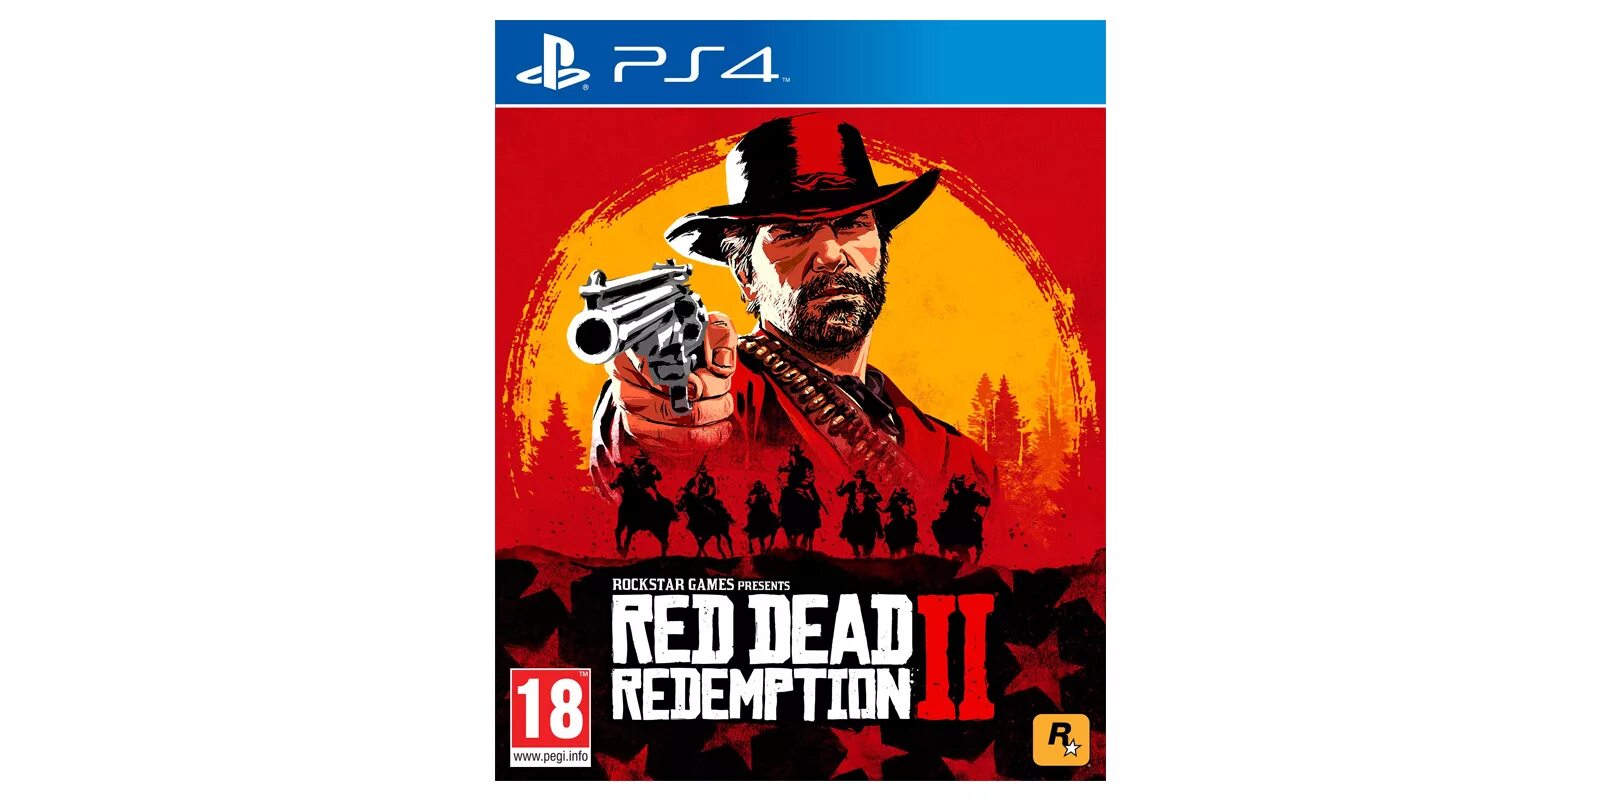 Redemption 2 ps4 купить. Rdr 2 ps4. Red Dead Redemption 2 ps4. Rdr 2 ps4 диск. Red Dead Redemption 1 ps4 диск.